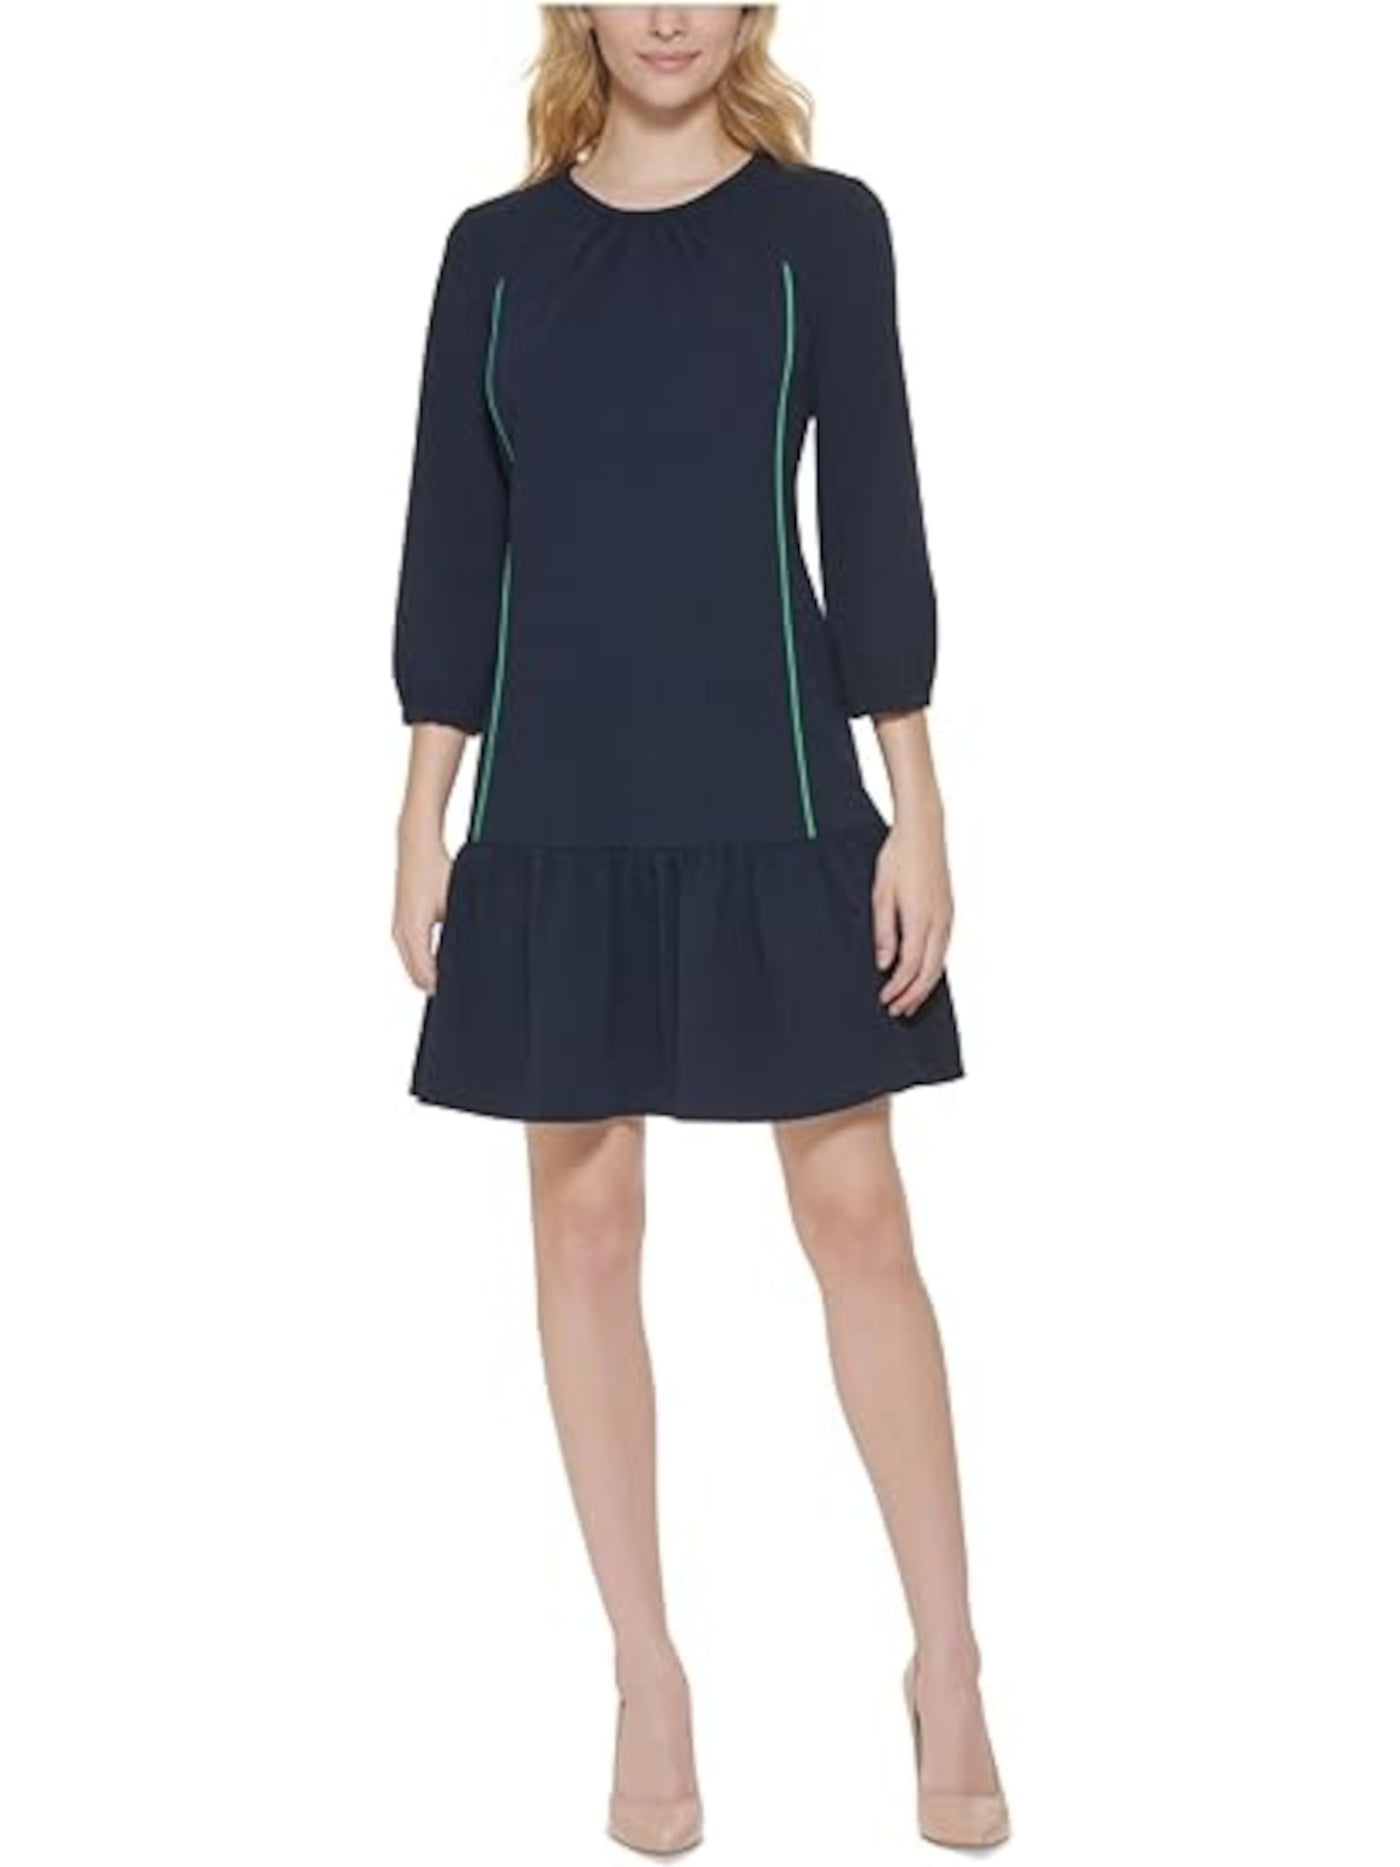 TOMMY HILFIGER Womens Navy Zippered Ruffled Unlined Gathered 3/4 Sleeve Round Neck Above The Knee Wear To Work Fit + Flare Dress 10